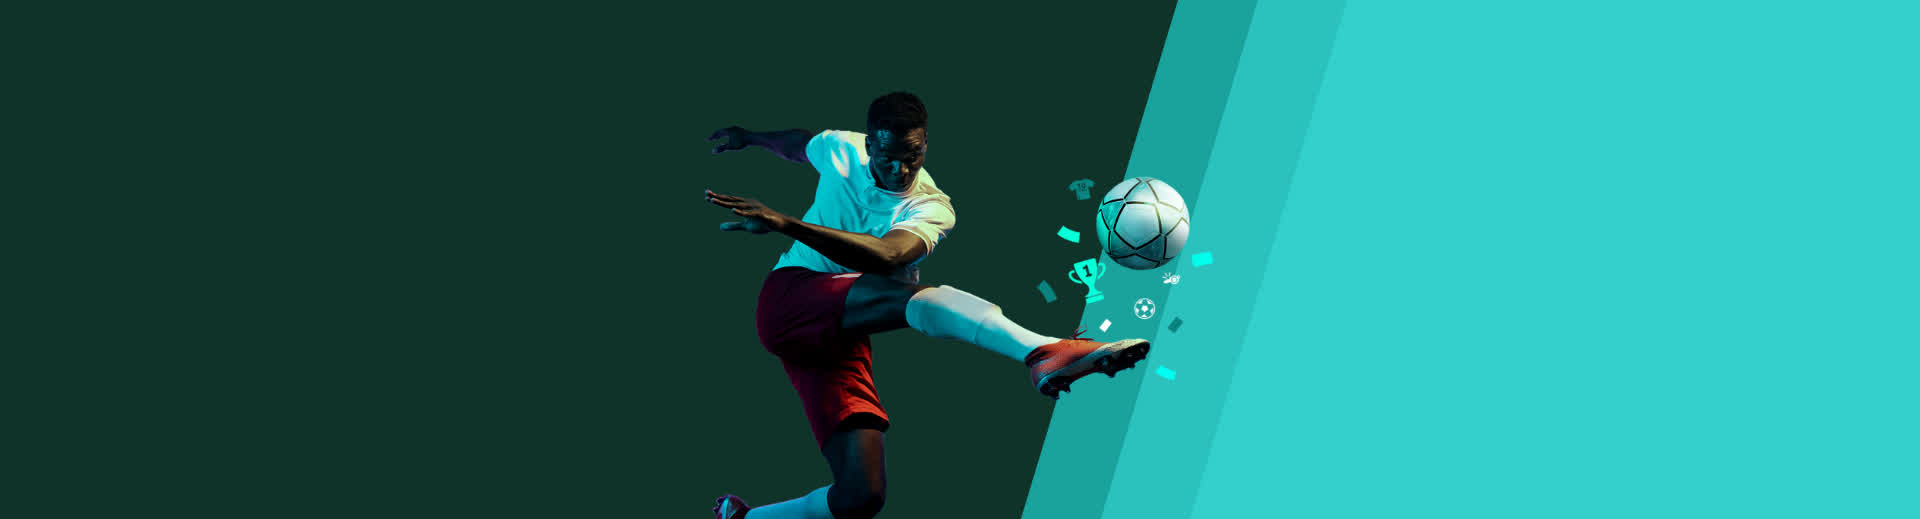 2022-10-28 12_00_13 PartyGaming - Generic Sports - No Copy Sitecore_Banner top 1920x519